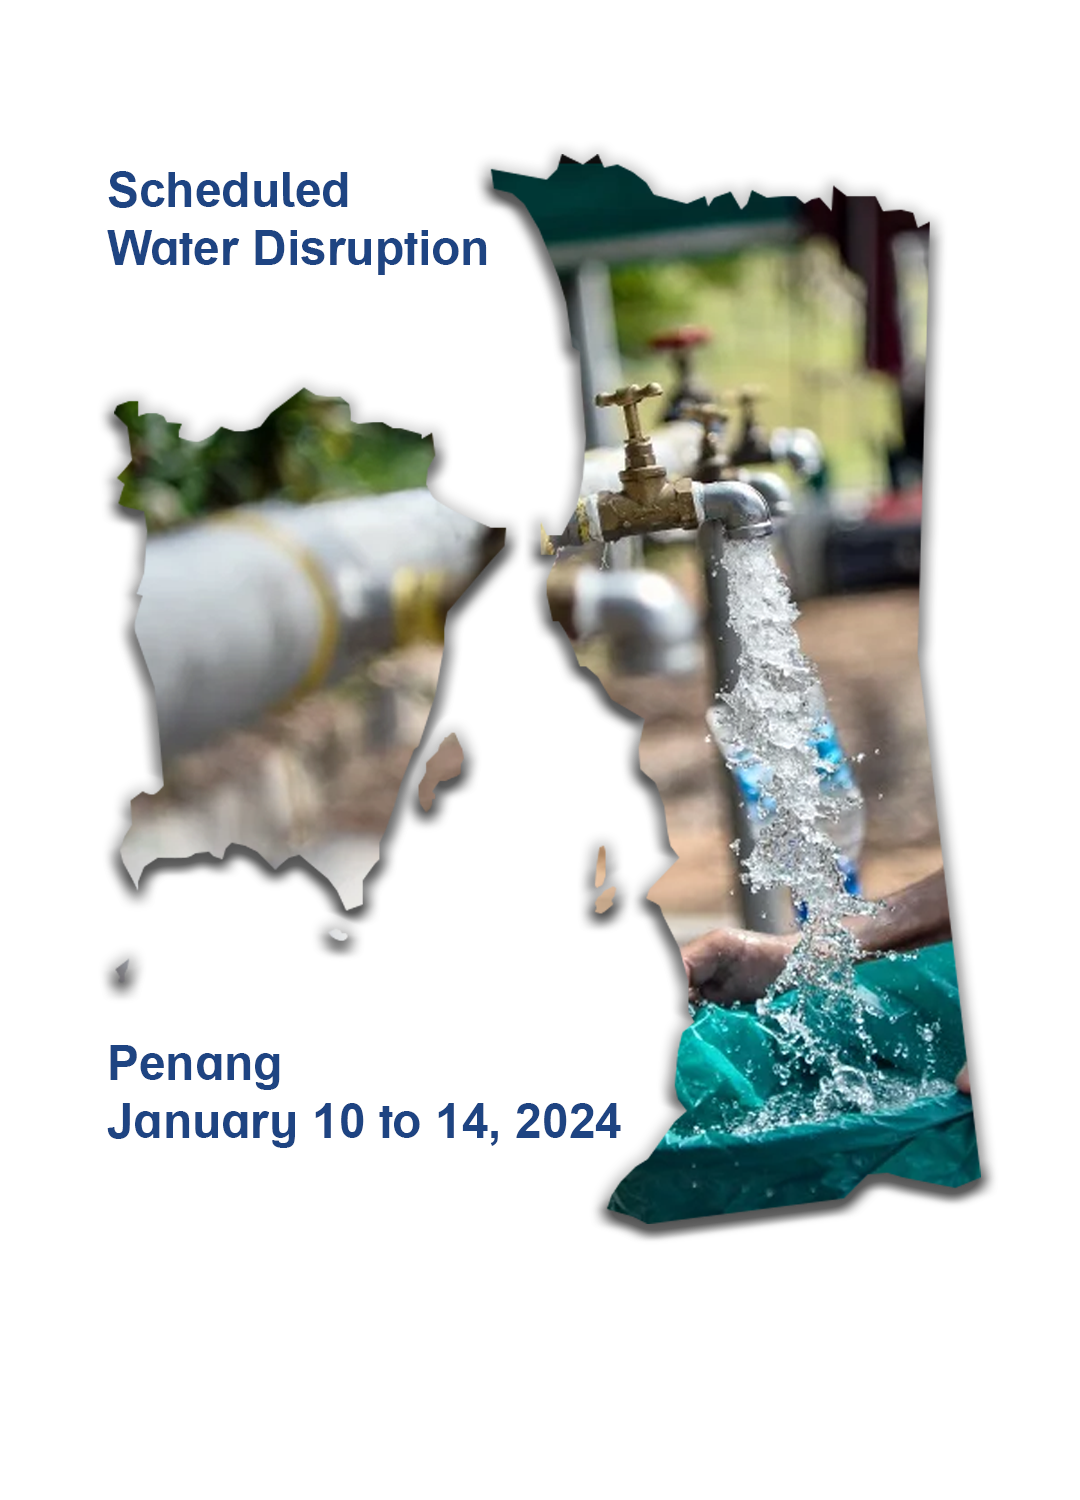 10 to 14 January 2024, Scheduled Water Disruption in Penang, PBAPP announcement